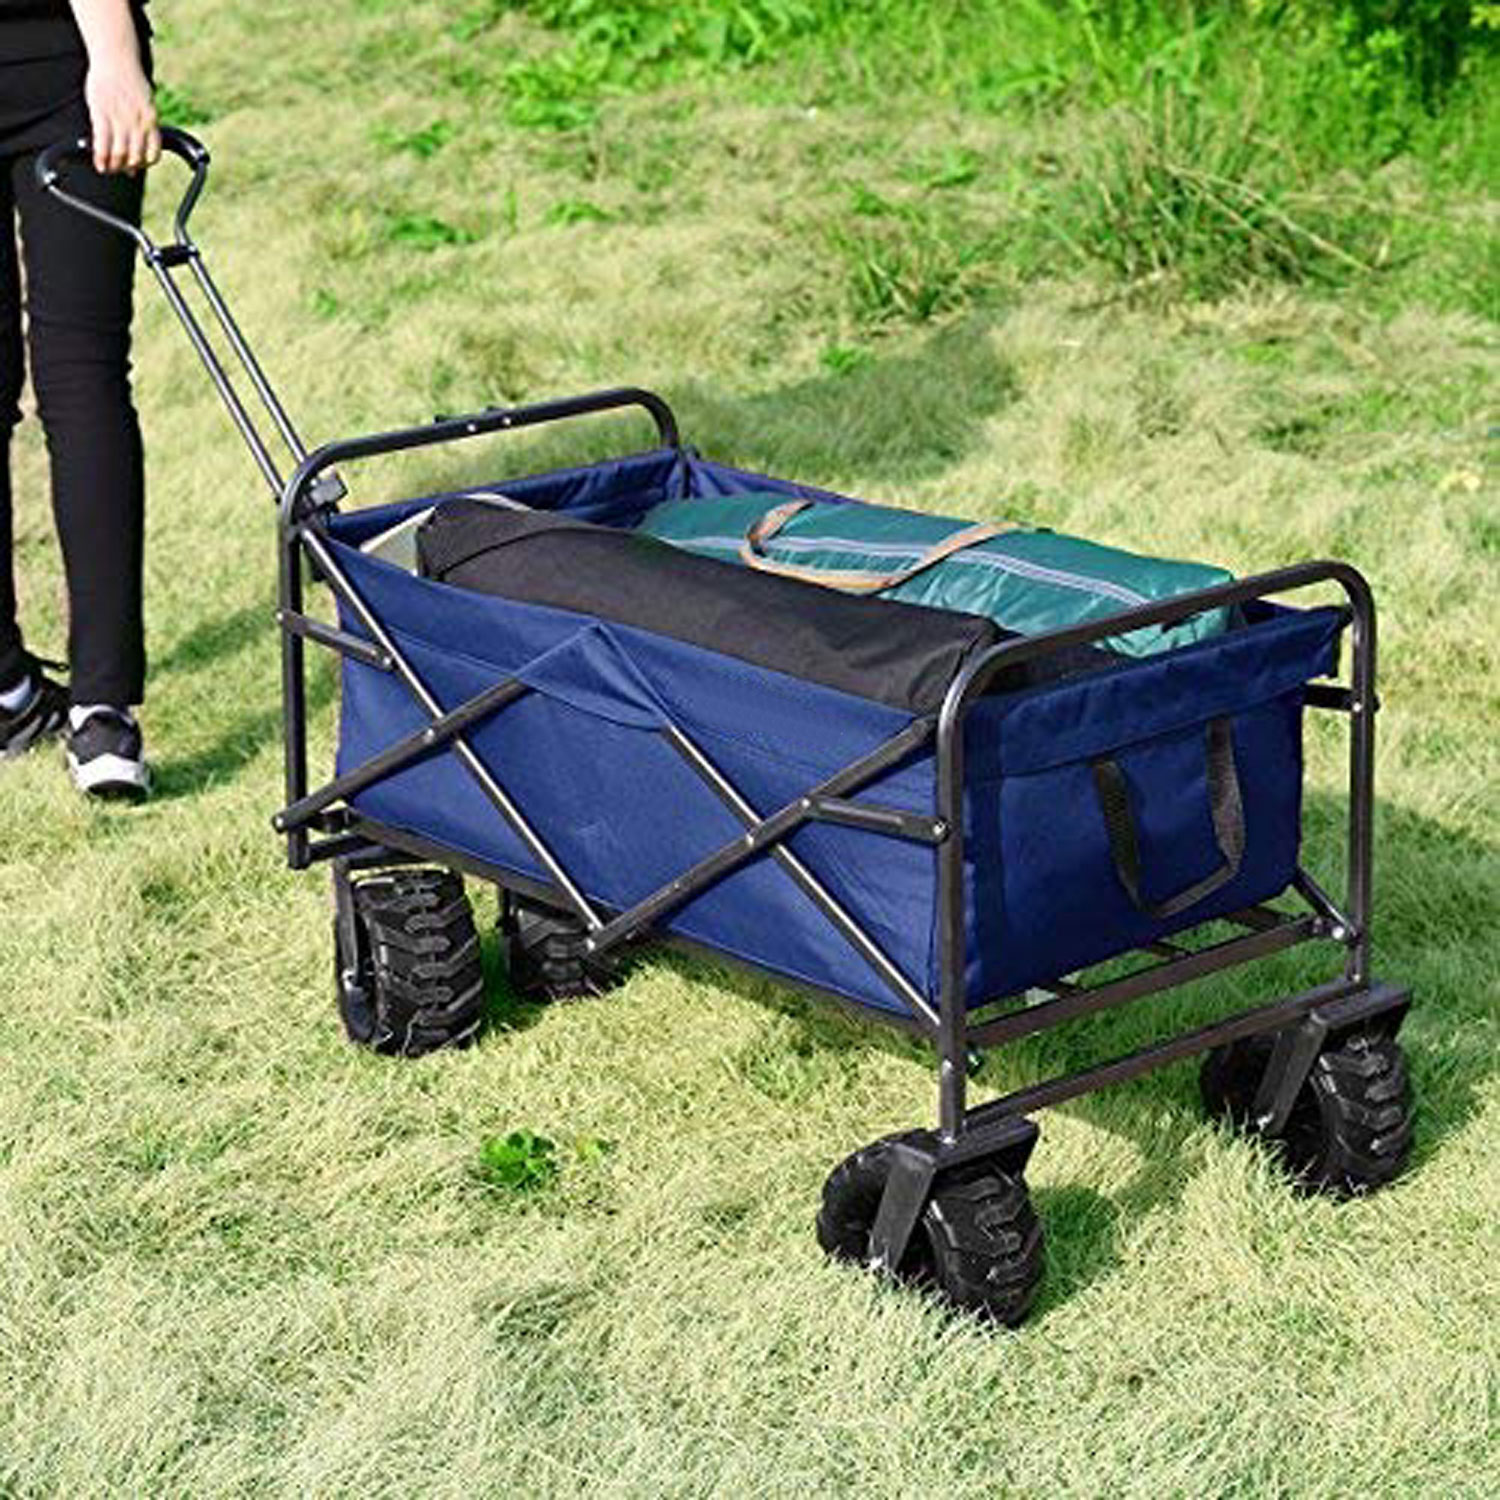 Sports Gardening Beach Utility Wagon 265 Pound Capacity for Outdoor Camping Picnic Shopping TOOCA Collapsible Wagon Folding Wagon Cart Outdoor Beach Wagon with Wide All Terrain Wheels 